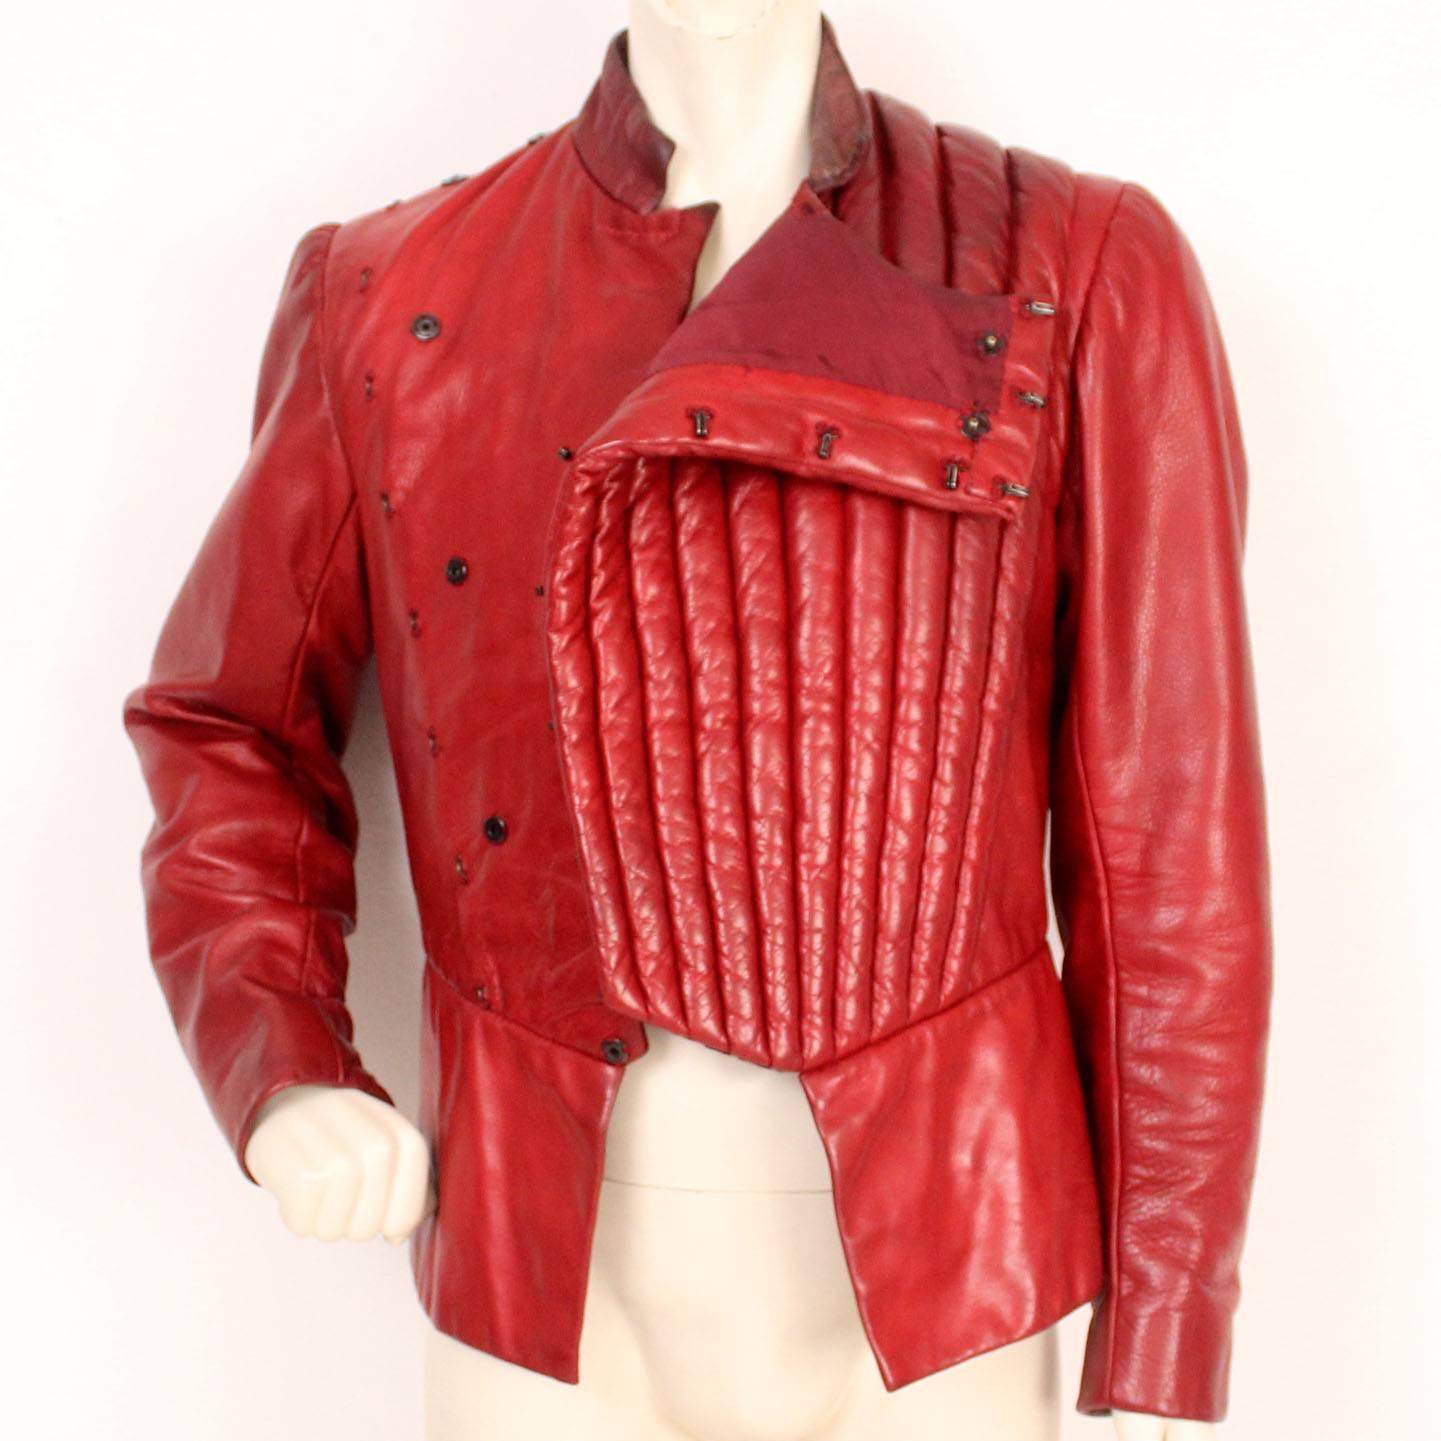 This buttery soft blood red leather jacket was created for the character of Arcite from "The Canterbury Tales" performed at the Royal Shakespeare Theater.  It is beautifully handcrafted with a quilted leather front fit for a princely